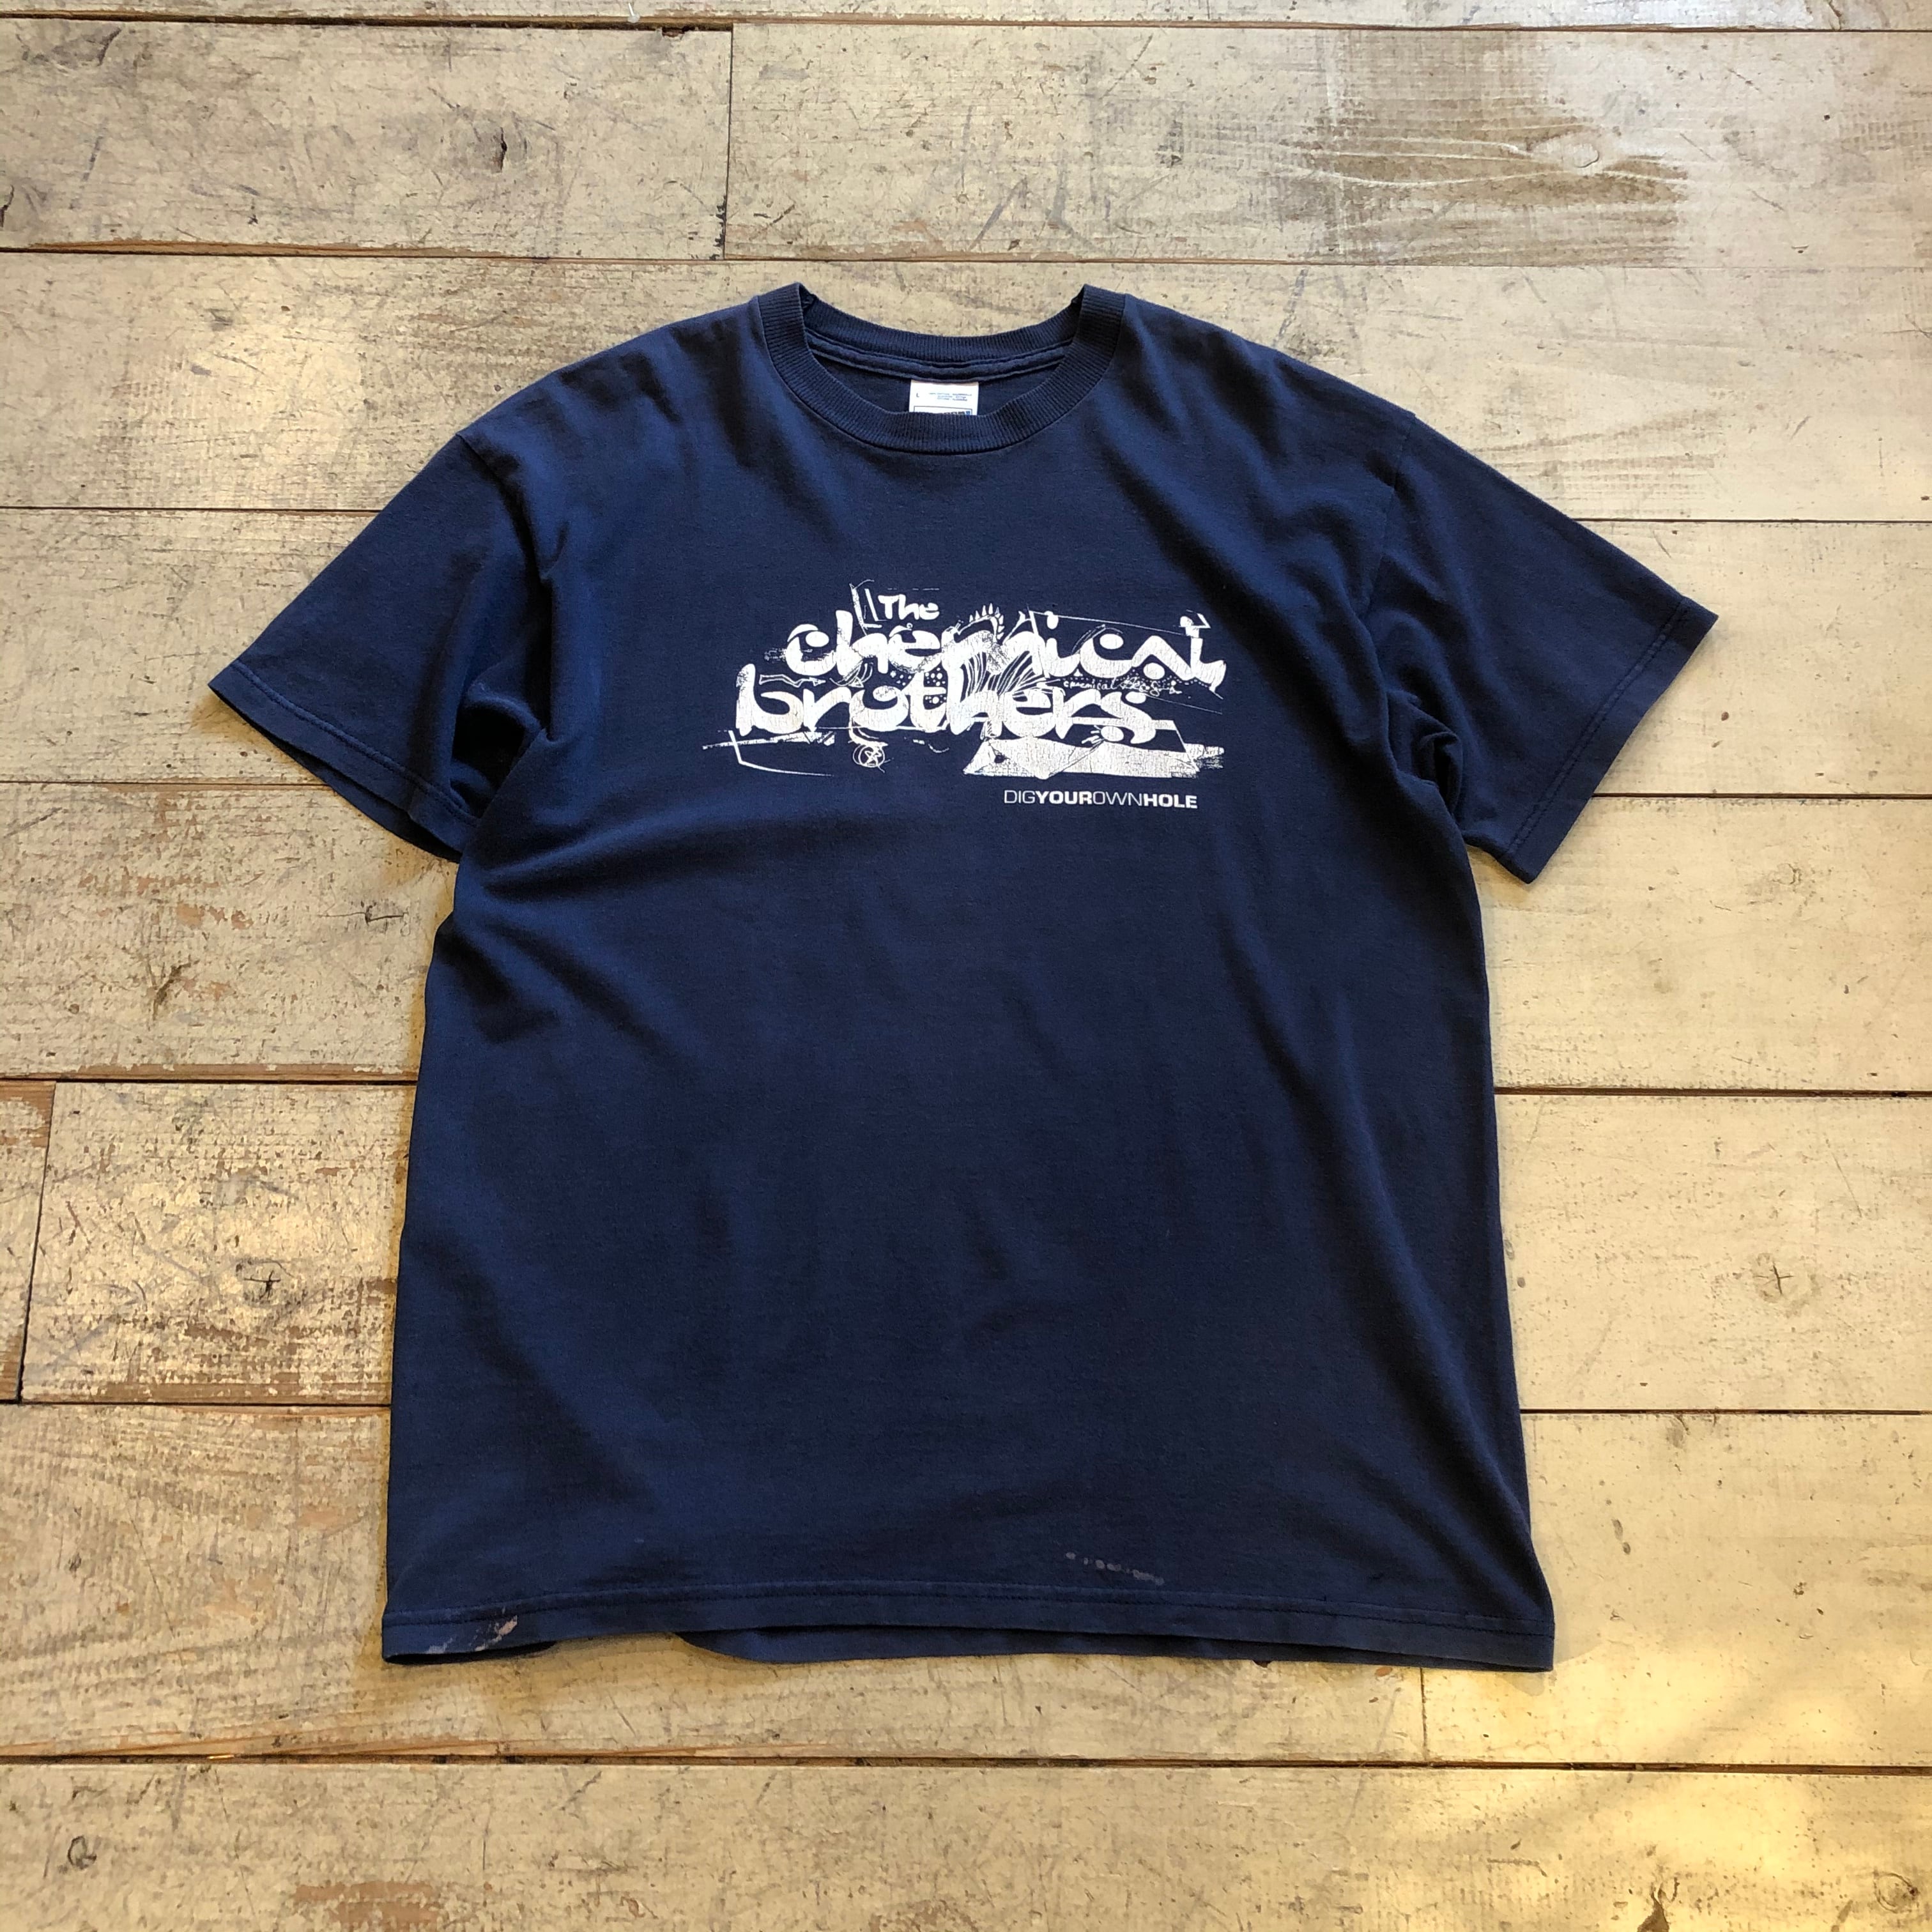 ★90s The Chemical Brothers リンガー Tシャツ